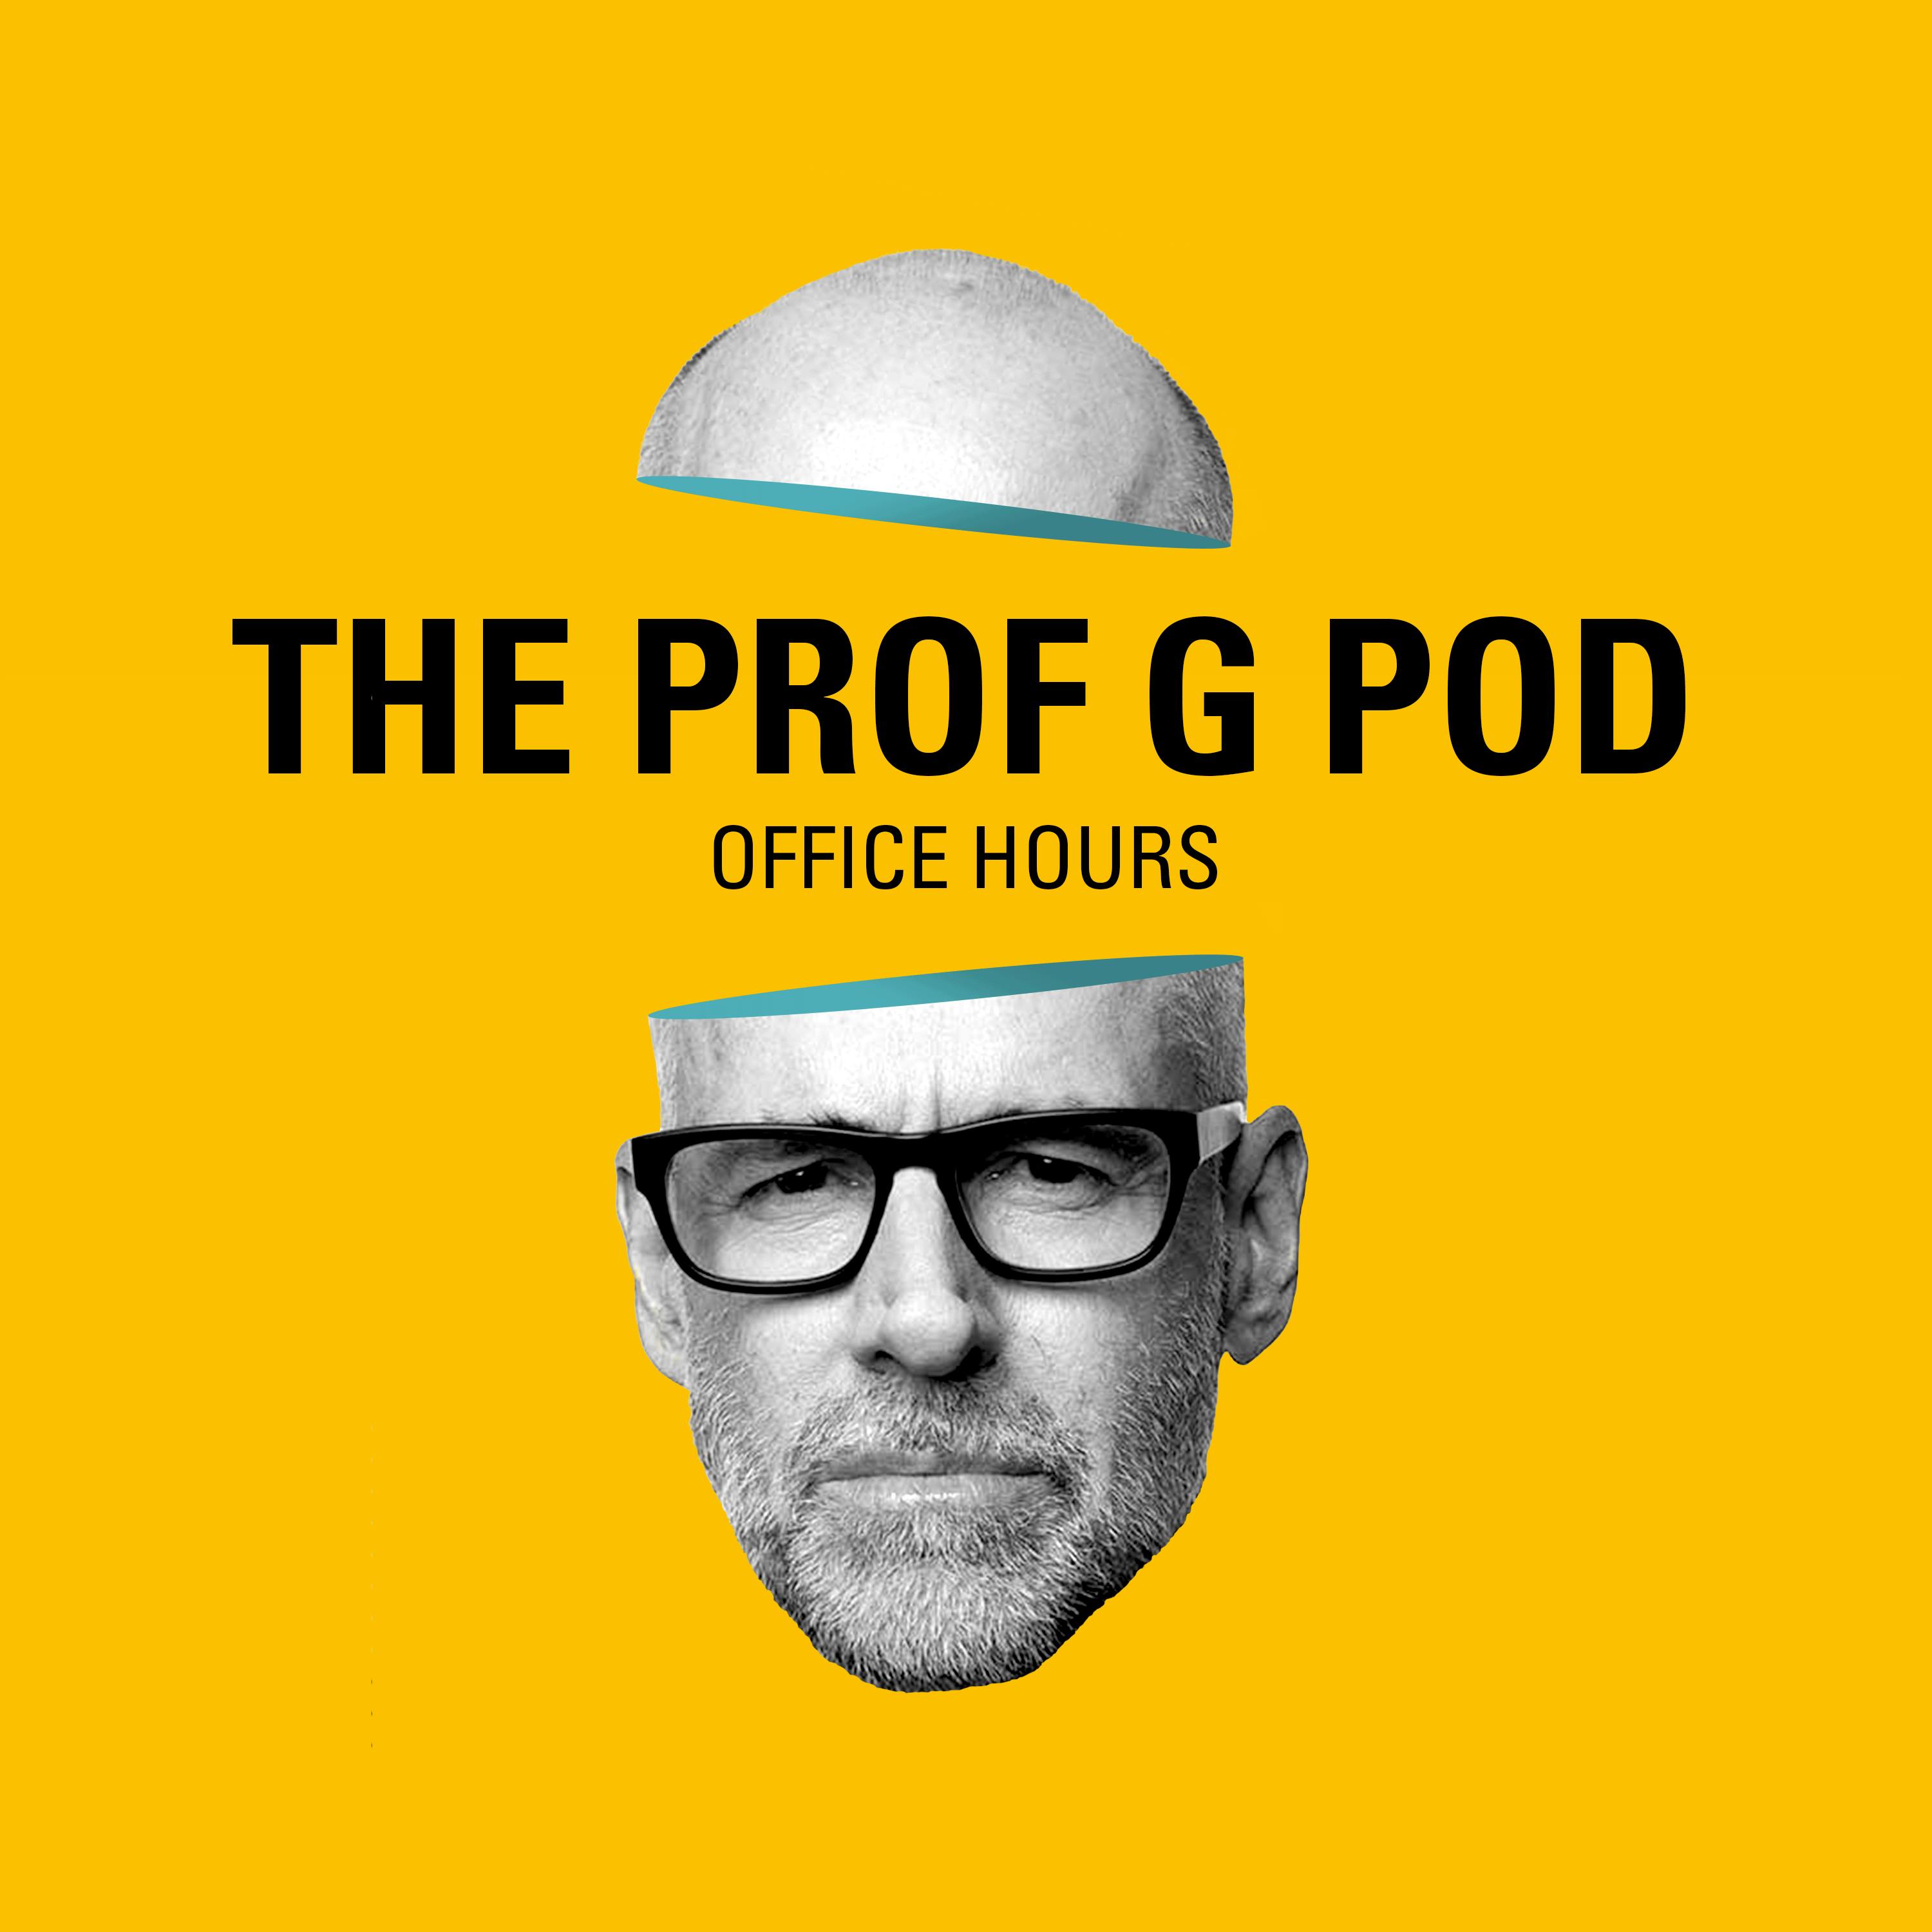 Office Hours: The Business of Podcasting, Leaving Your Job To Start A Business, and the Pros and Cons of Stock Buybacks by Vox Media Podcast Network